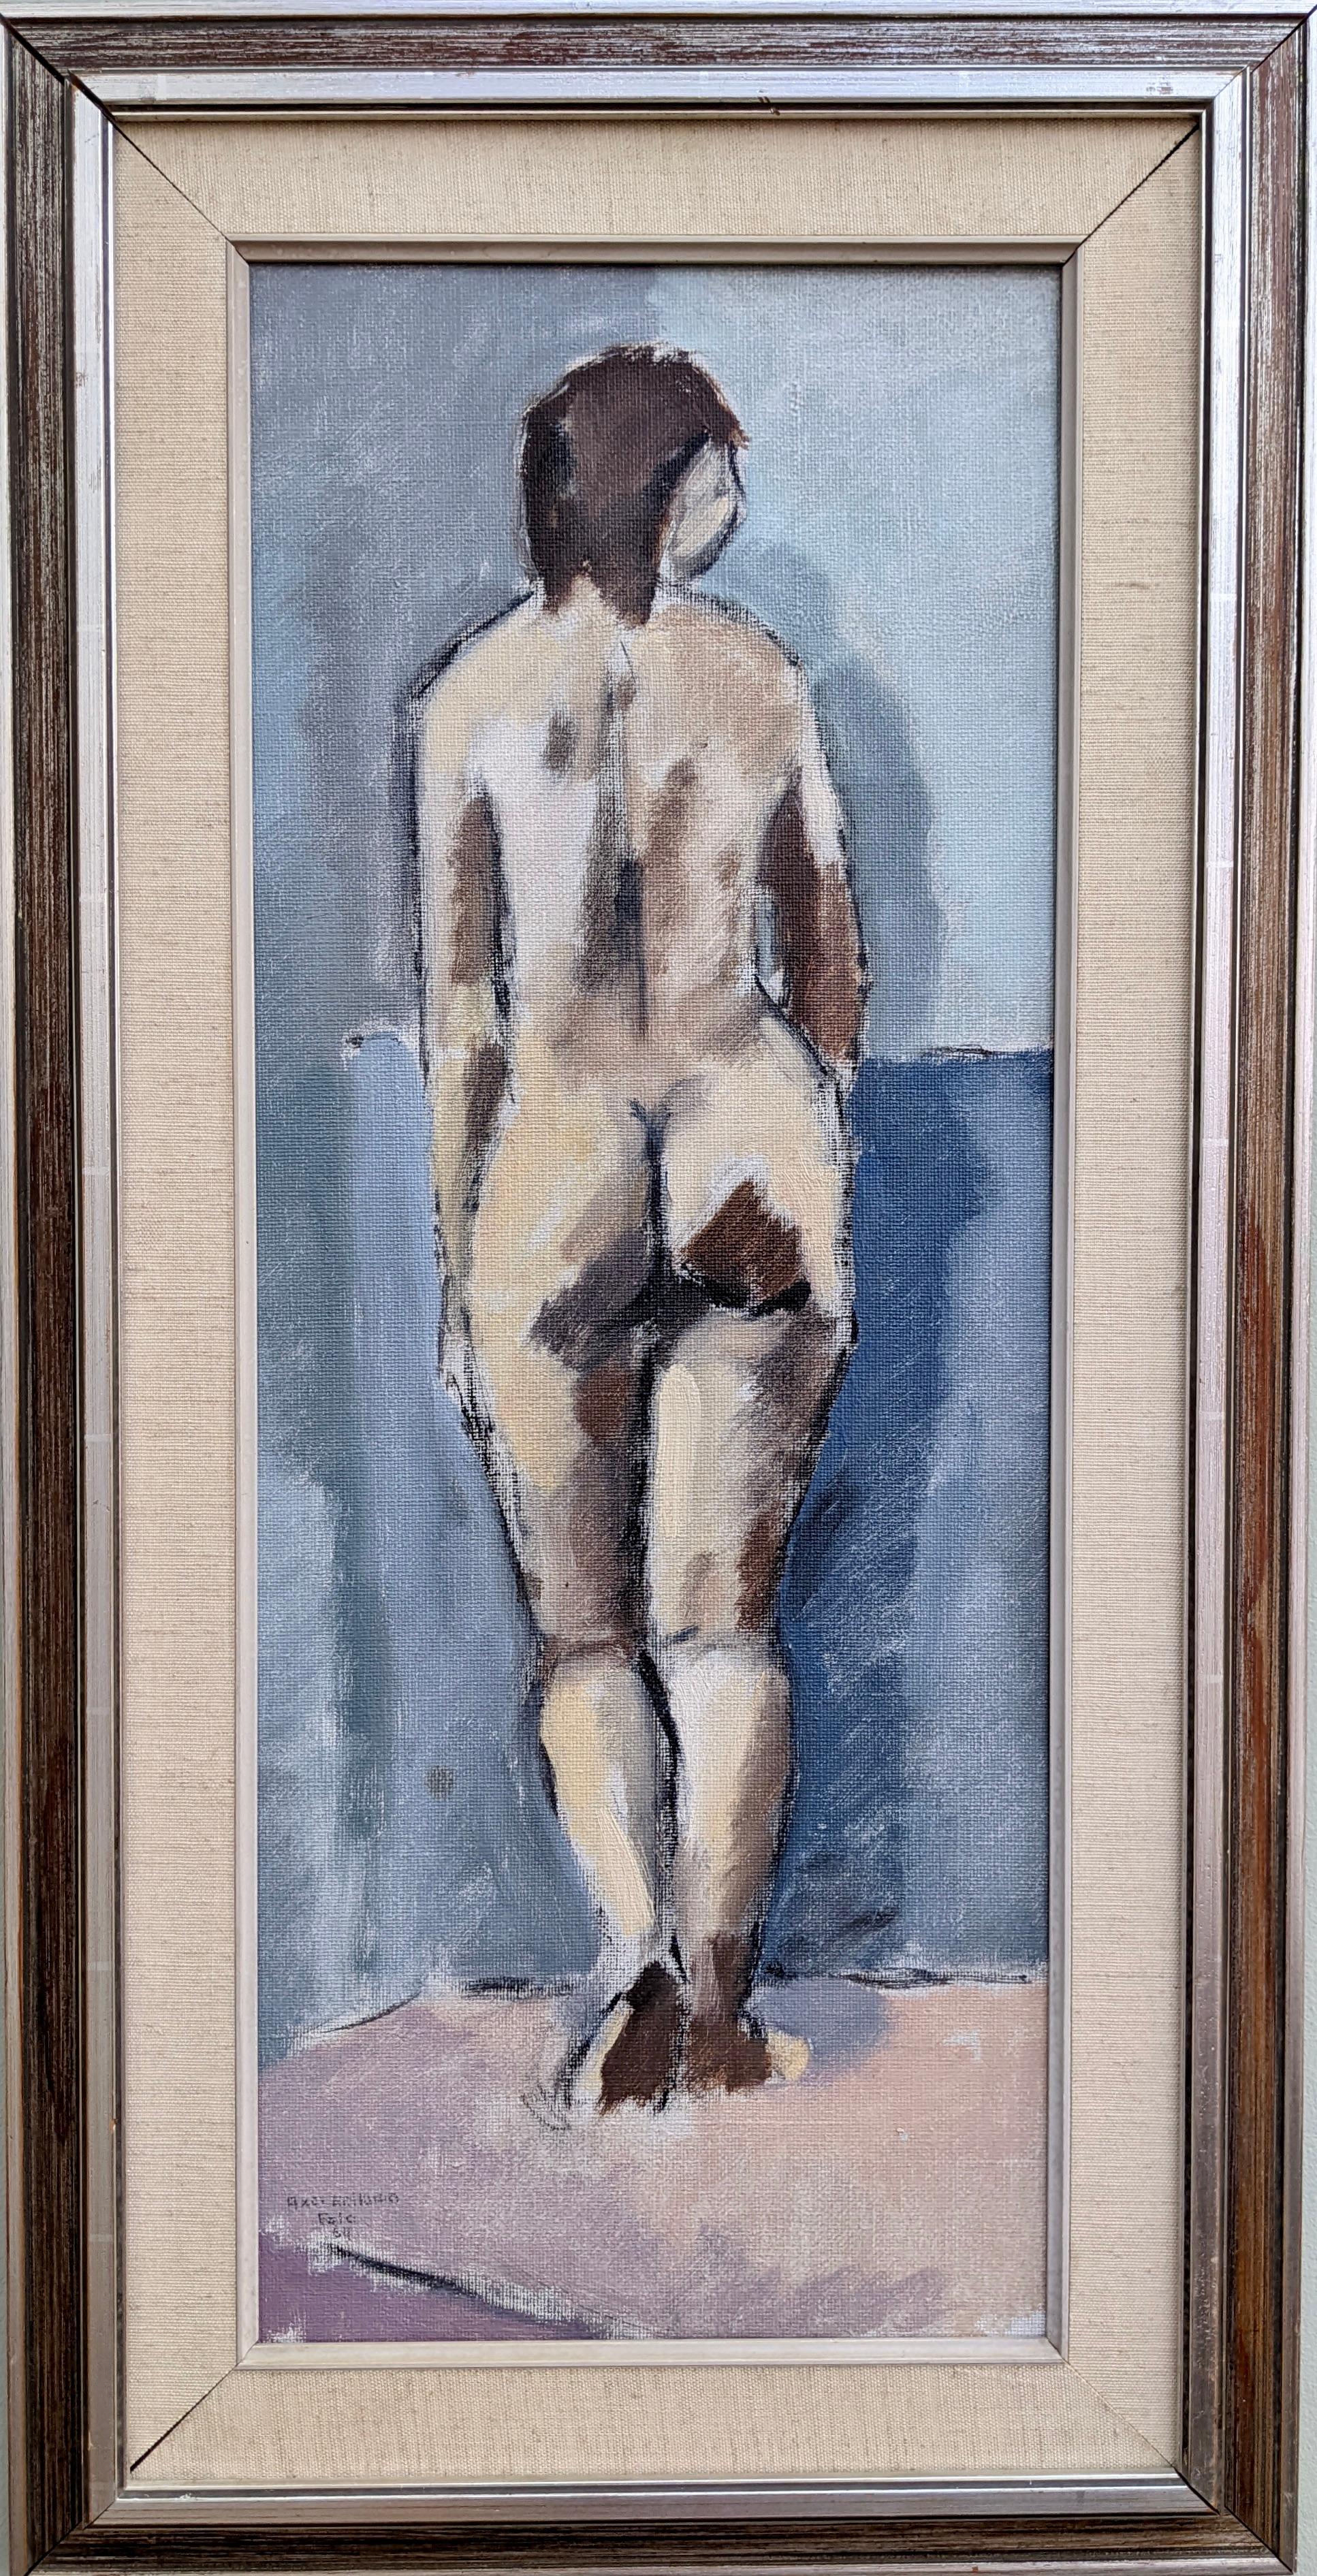 Unknown Nude Painting - 1964 Modernist Figurative Framed Art Oil Painting - Study of a Standing Nude